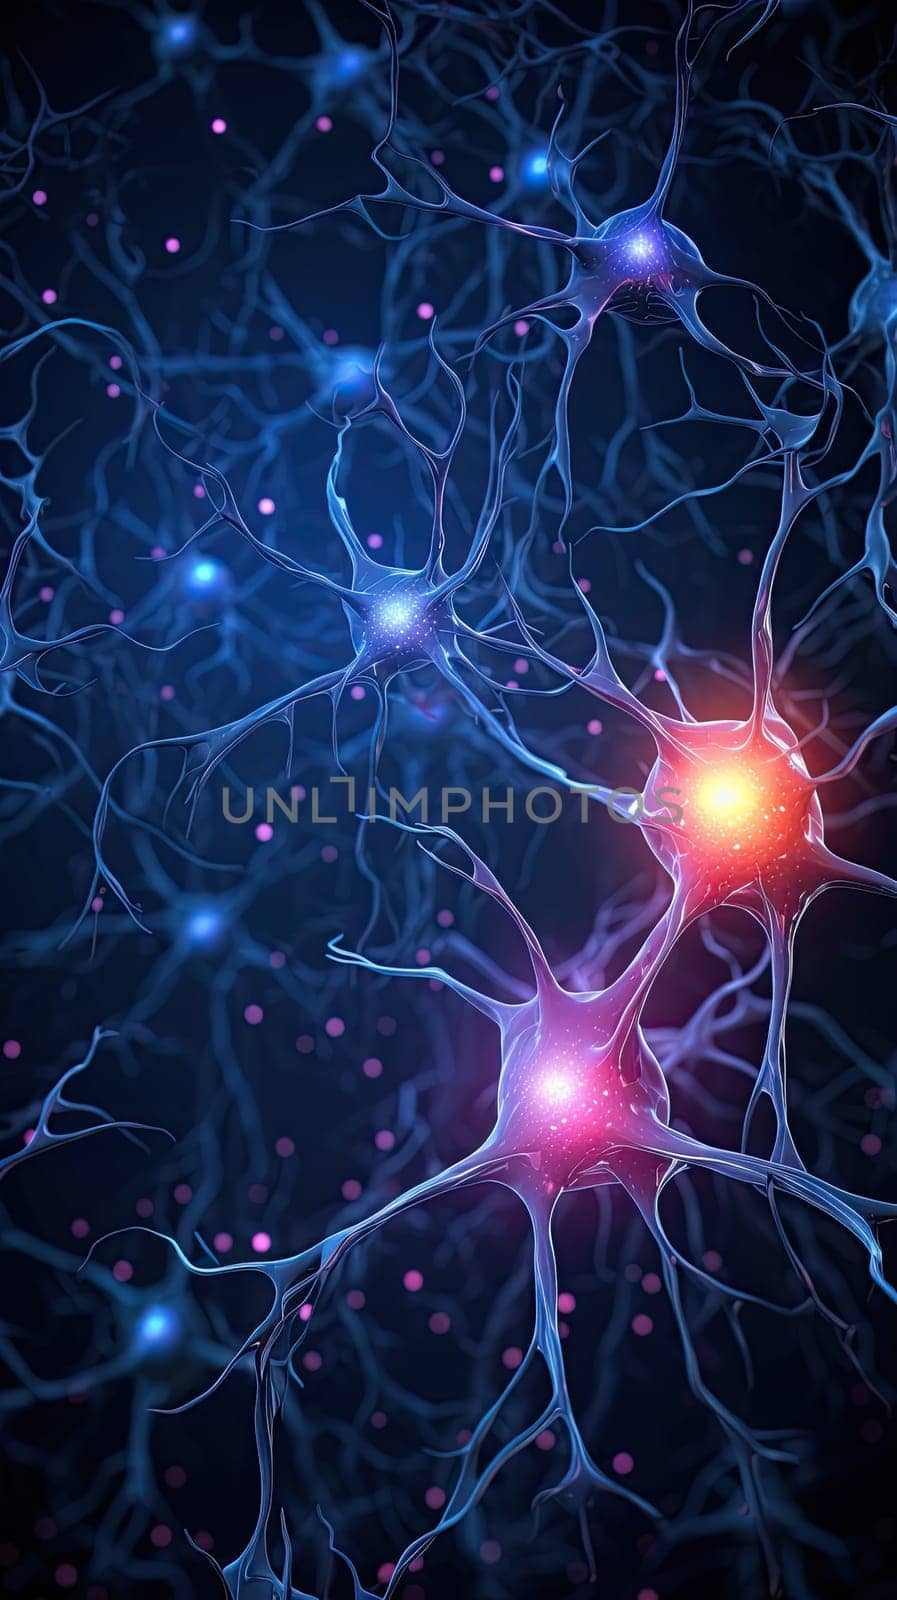 Conceptual illustration of neuron cells with glowing link knots in abstract dark space by papatonic